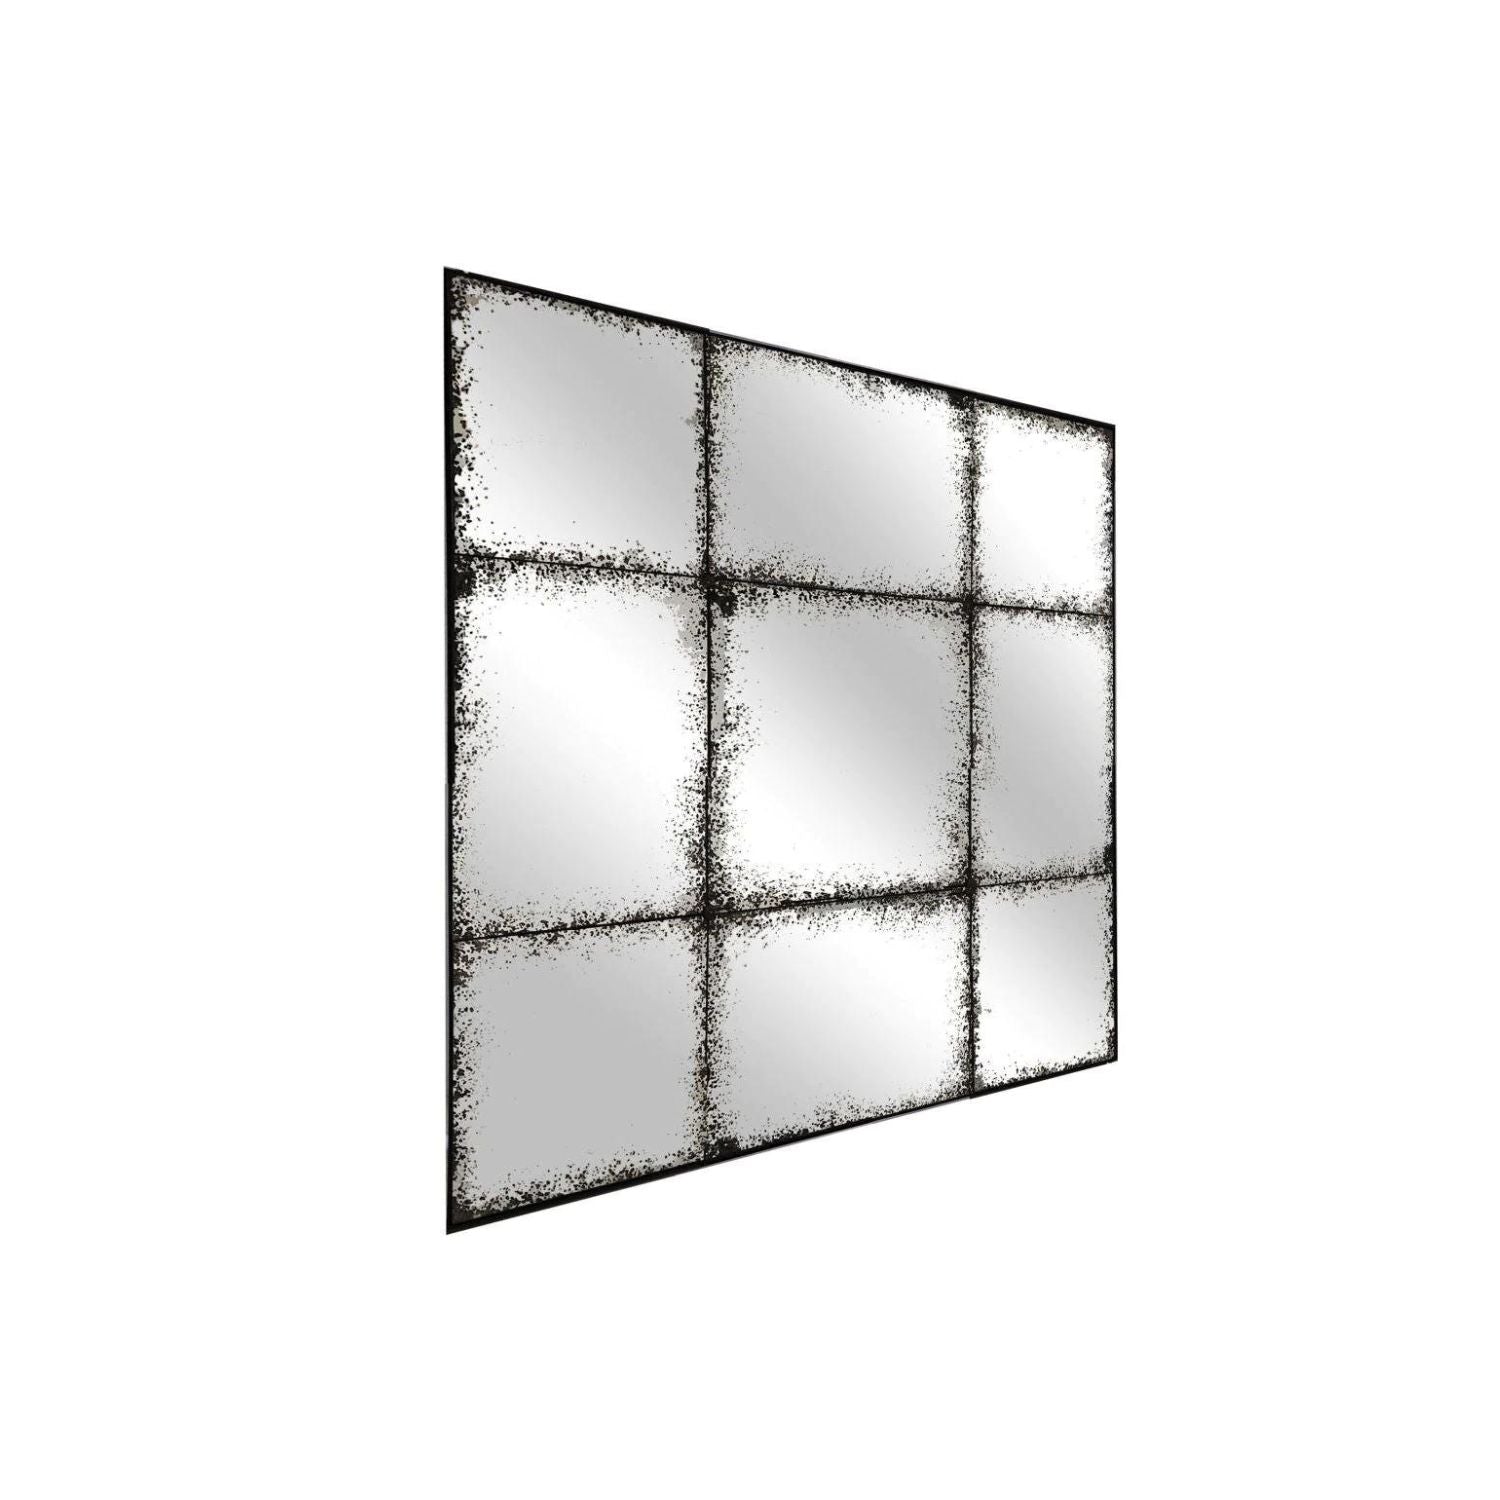 Square Black Window Mirror with Antique Effect